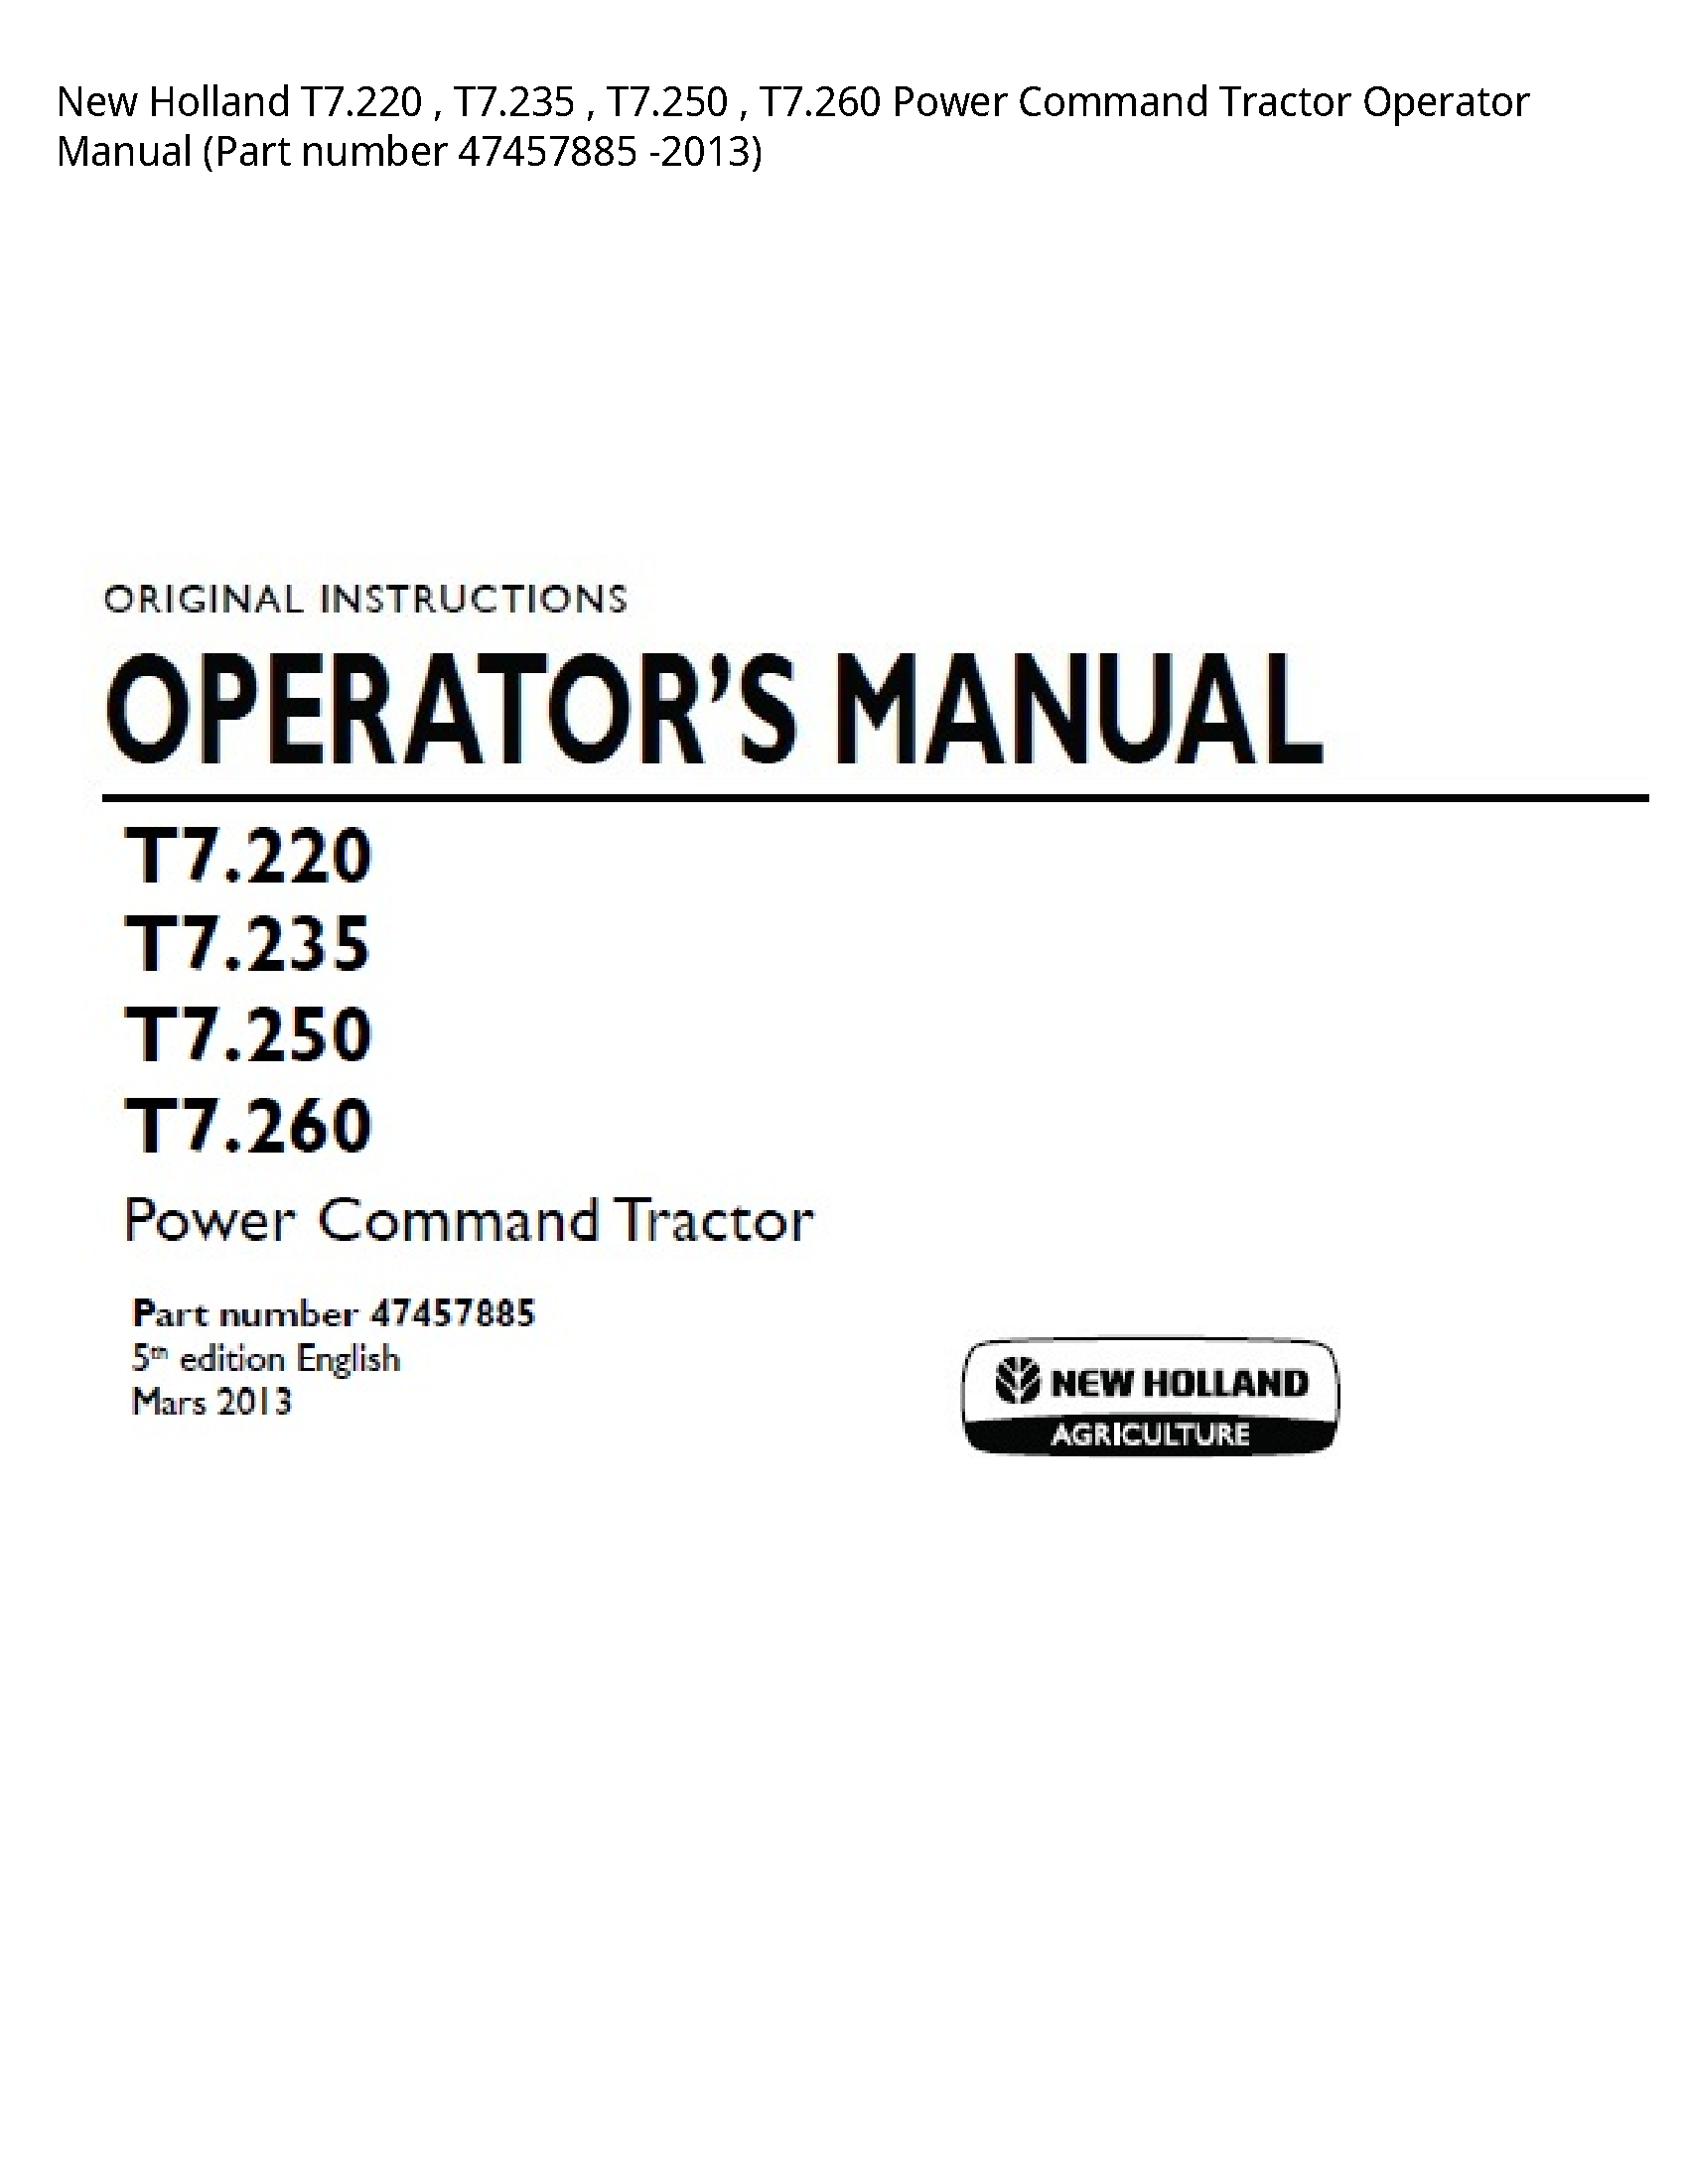 New Holland T7.220 Power Command Tractor Operator manual